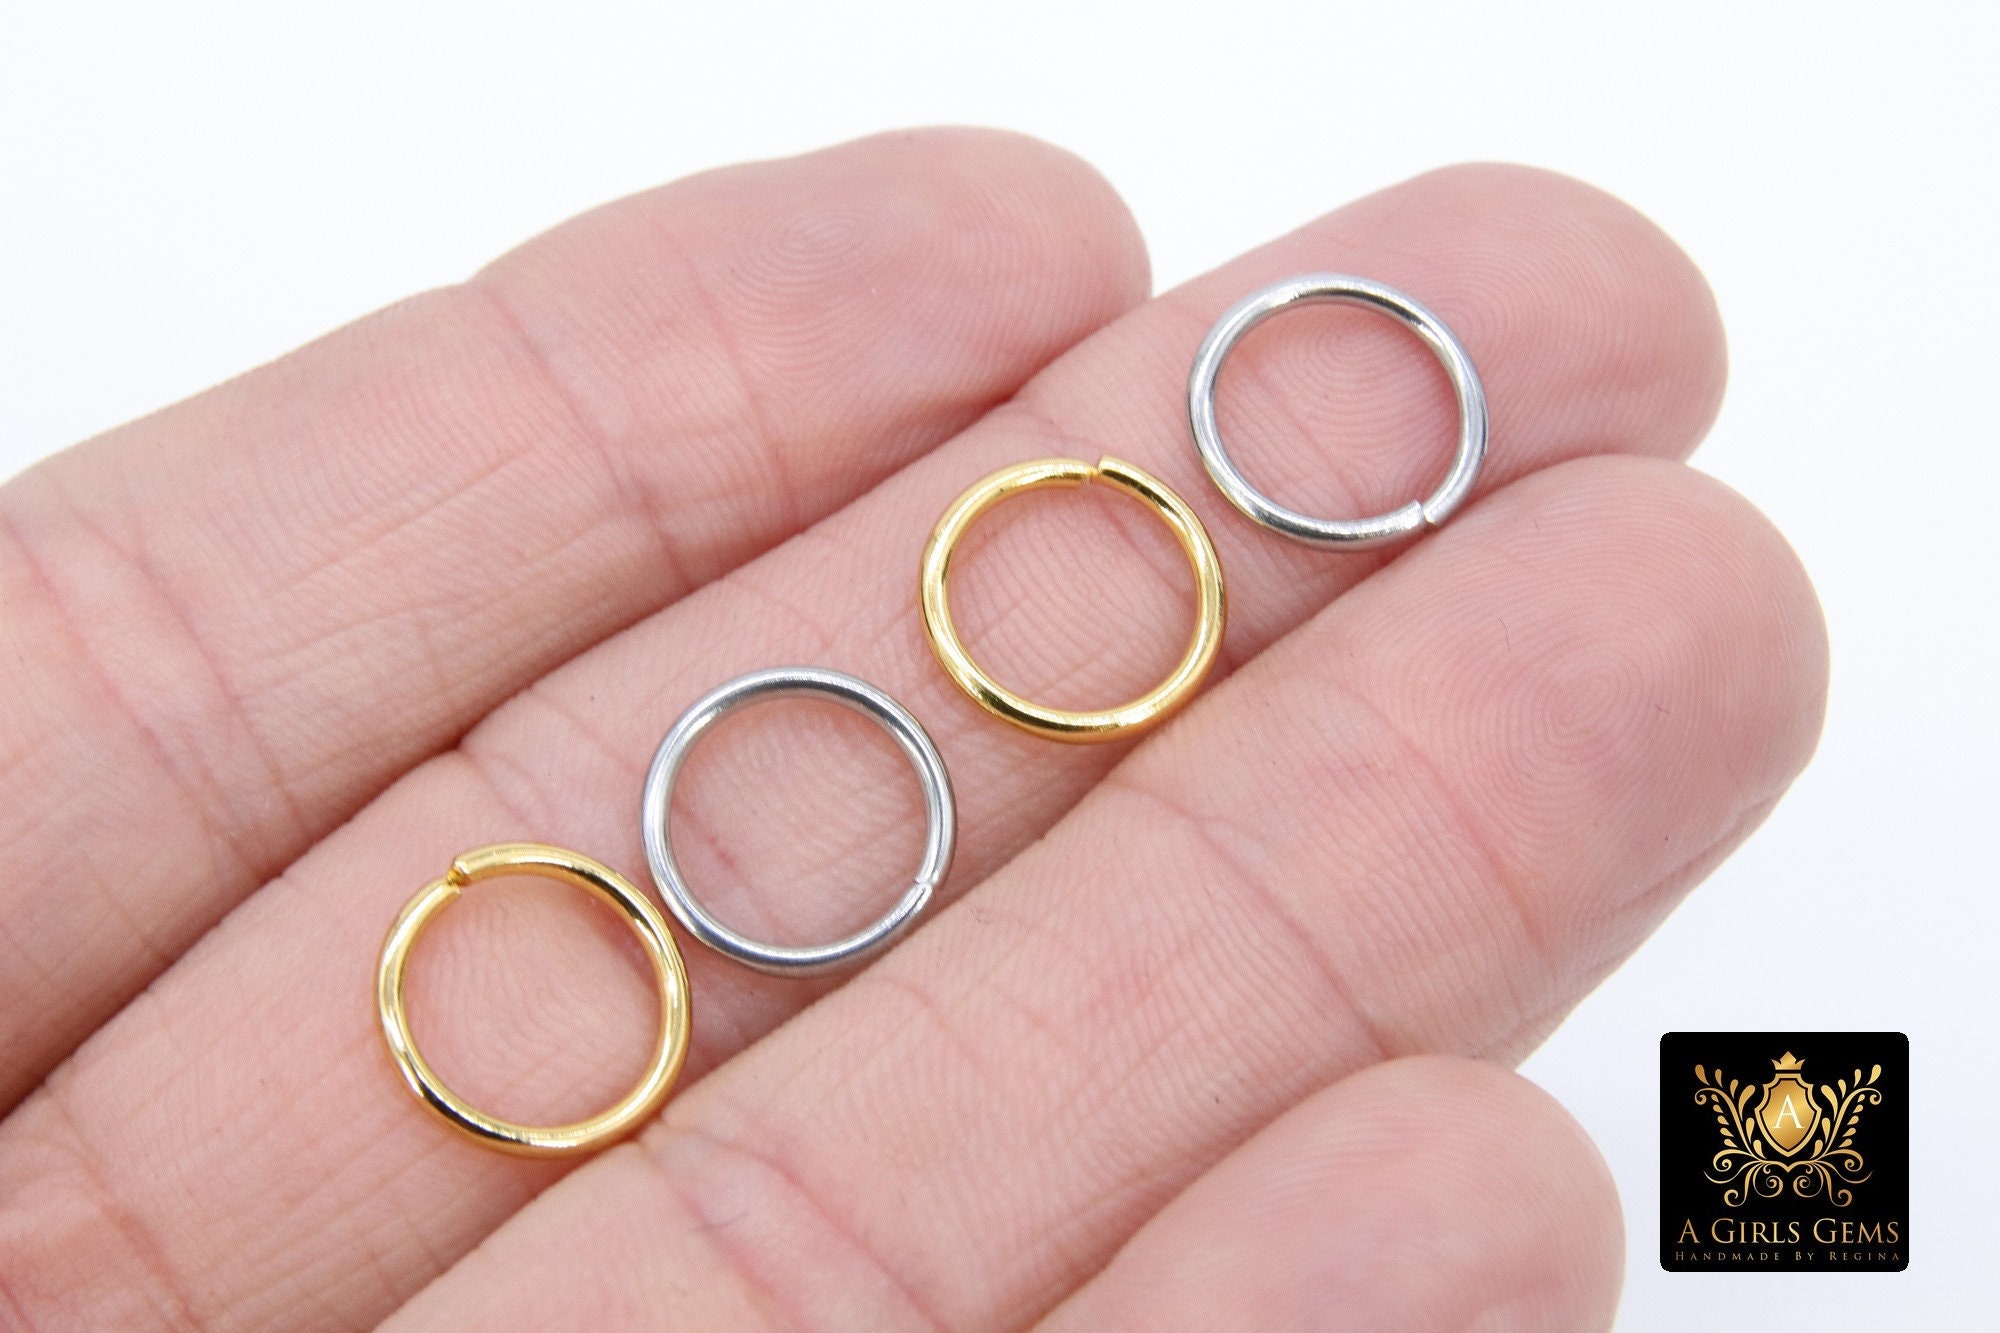 Jump ring tool, silver-finished brass, 9mm wide, size 6. Sold per